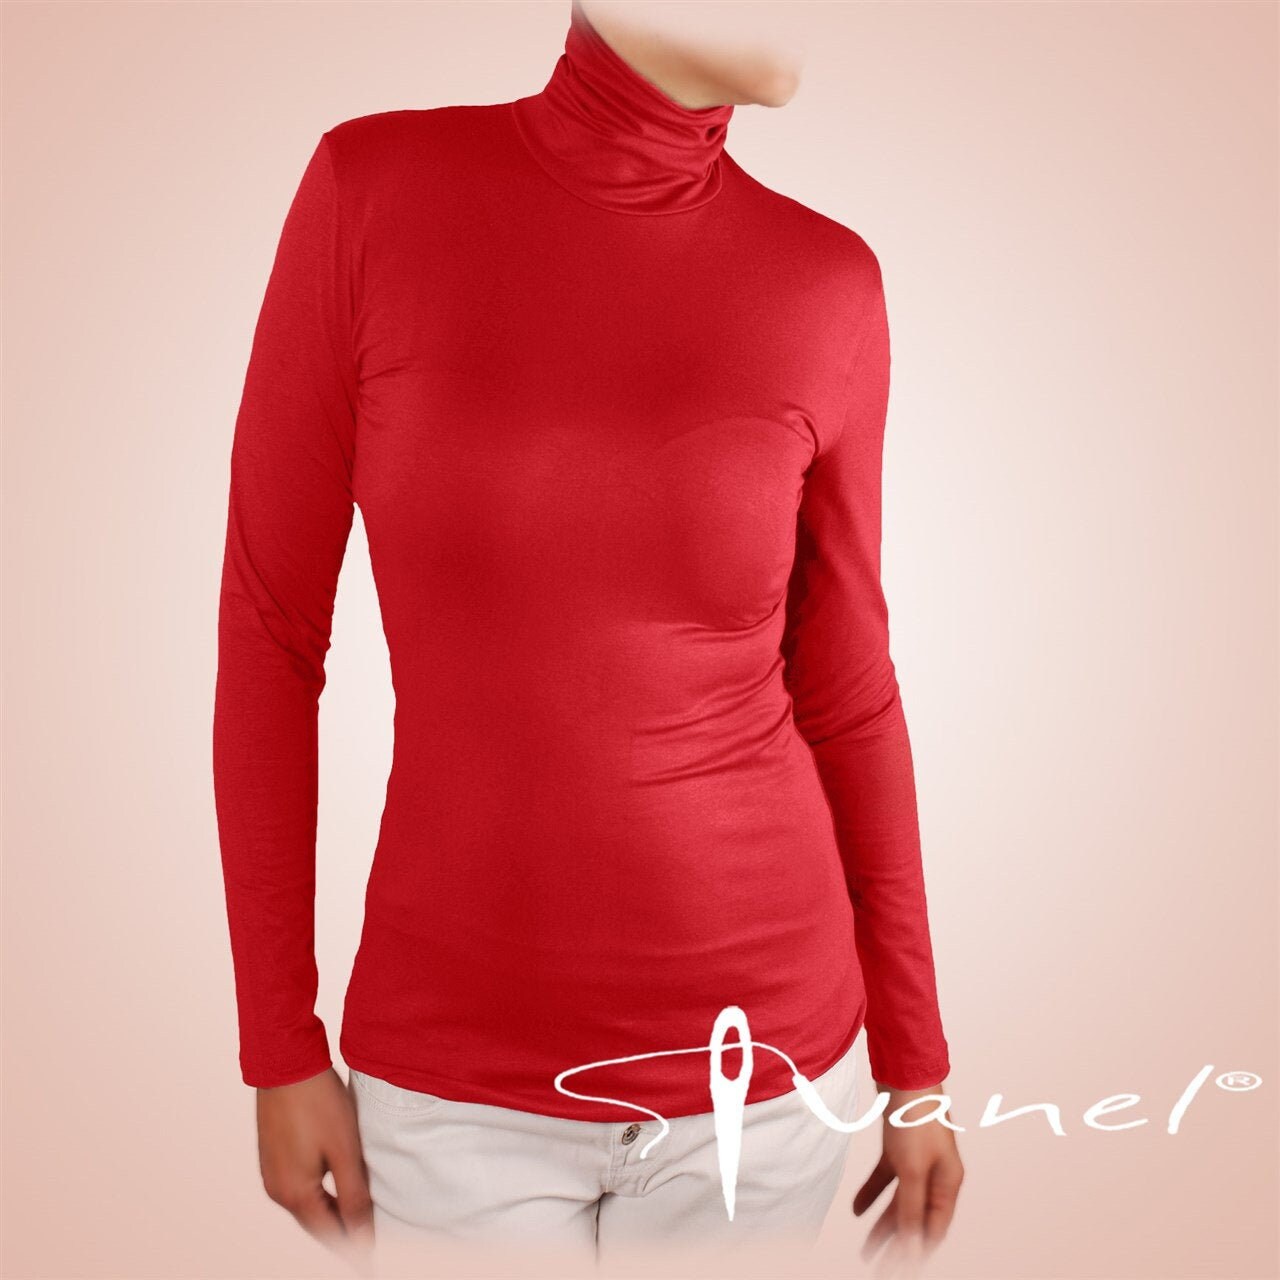 Turtleneck Top, Slim Skin Tight Stretchy Turtleneck Top, Long Sleeves  Blouse, Women Top, T-shirt, Fitted Tops, 28 Colors S, M, L, XL, XXL 